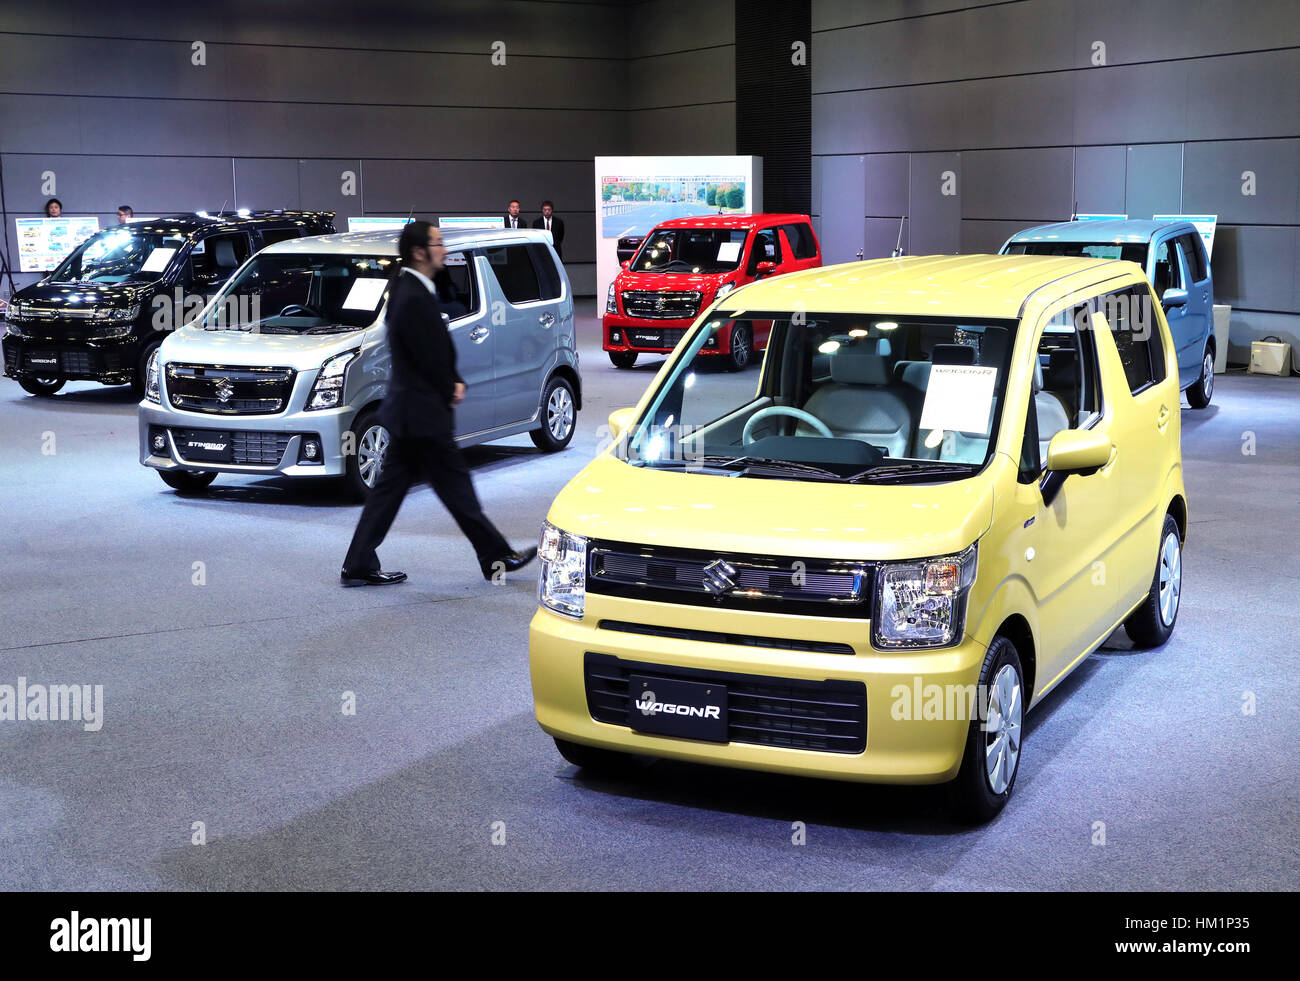 Tokyo, Japan. 1st Feb, 2017. Japan's minicar maker Suzuki Motor displays the mini wagon 'Wagon R' which has 660cc engine or engine/electric-motor hybrid system to drive roomy body in Tokyo on February 1, 2017. The new Wagon R has various safety devices and minicar's first head-up display. Credit: Yoshio Tsunoda/AFLO/Alamy Live News Stock Photo